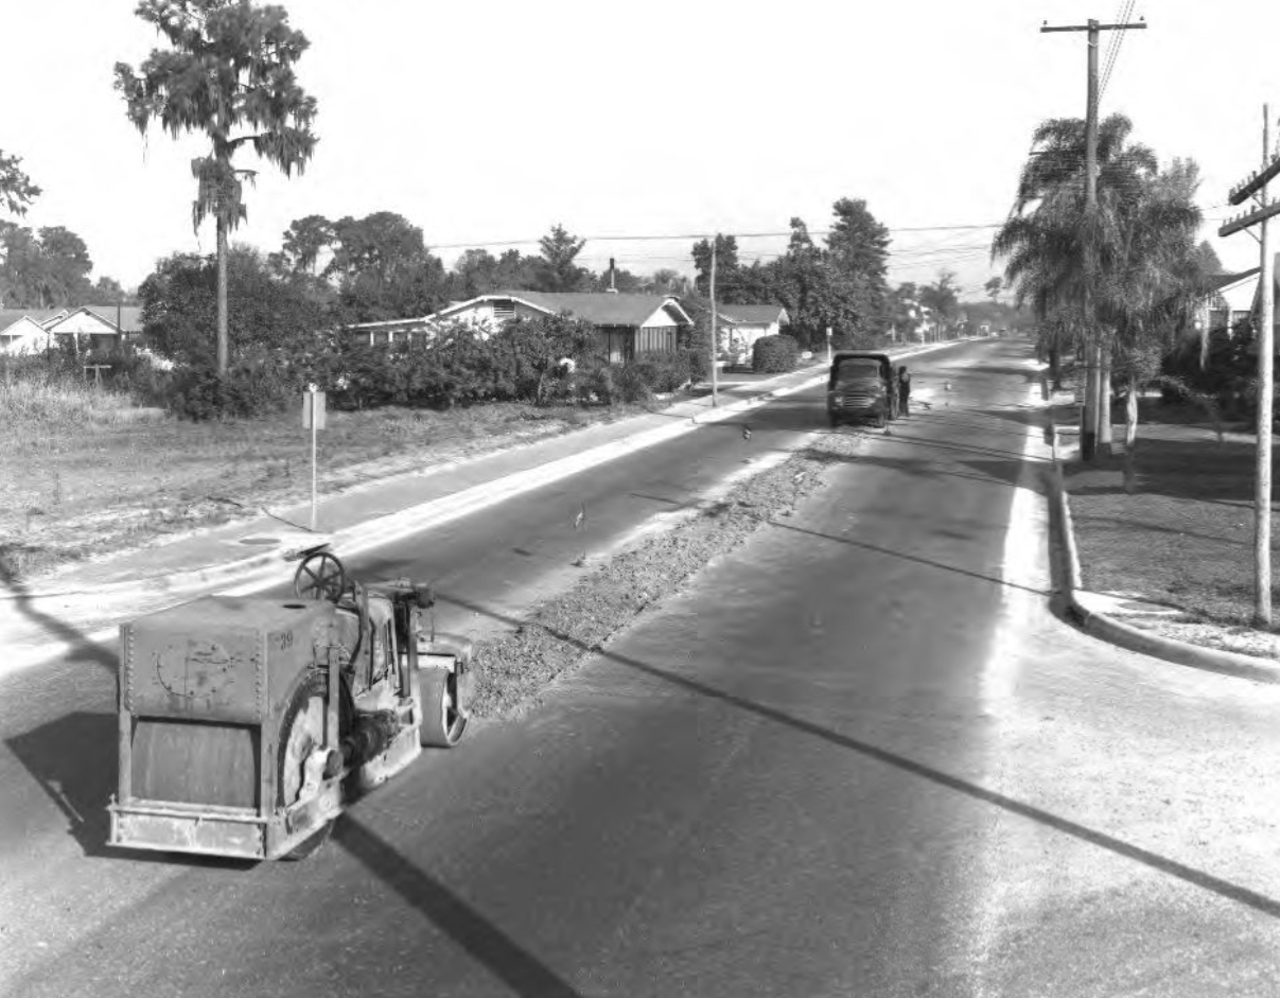 Tearing up streetcar tracks on Highland Avenue one block north of Osborne Avenue in Tampa, Florida on Jan. 4, 1951
Photo by Burgert Brothers via Tampa-Hillsborough County Public Library System